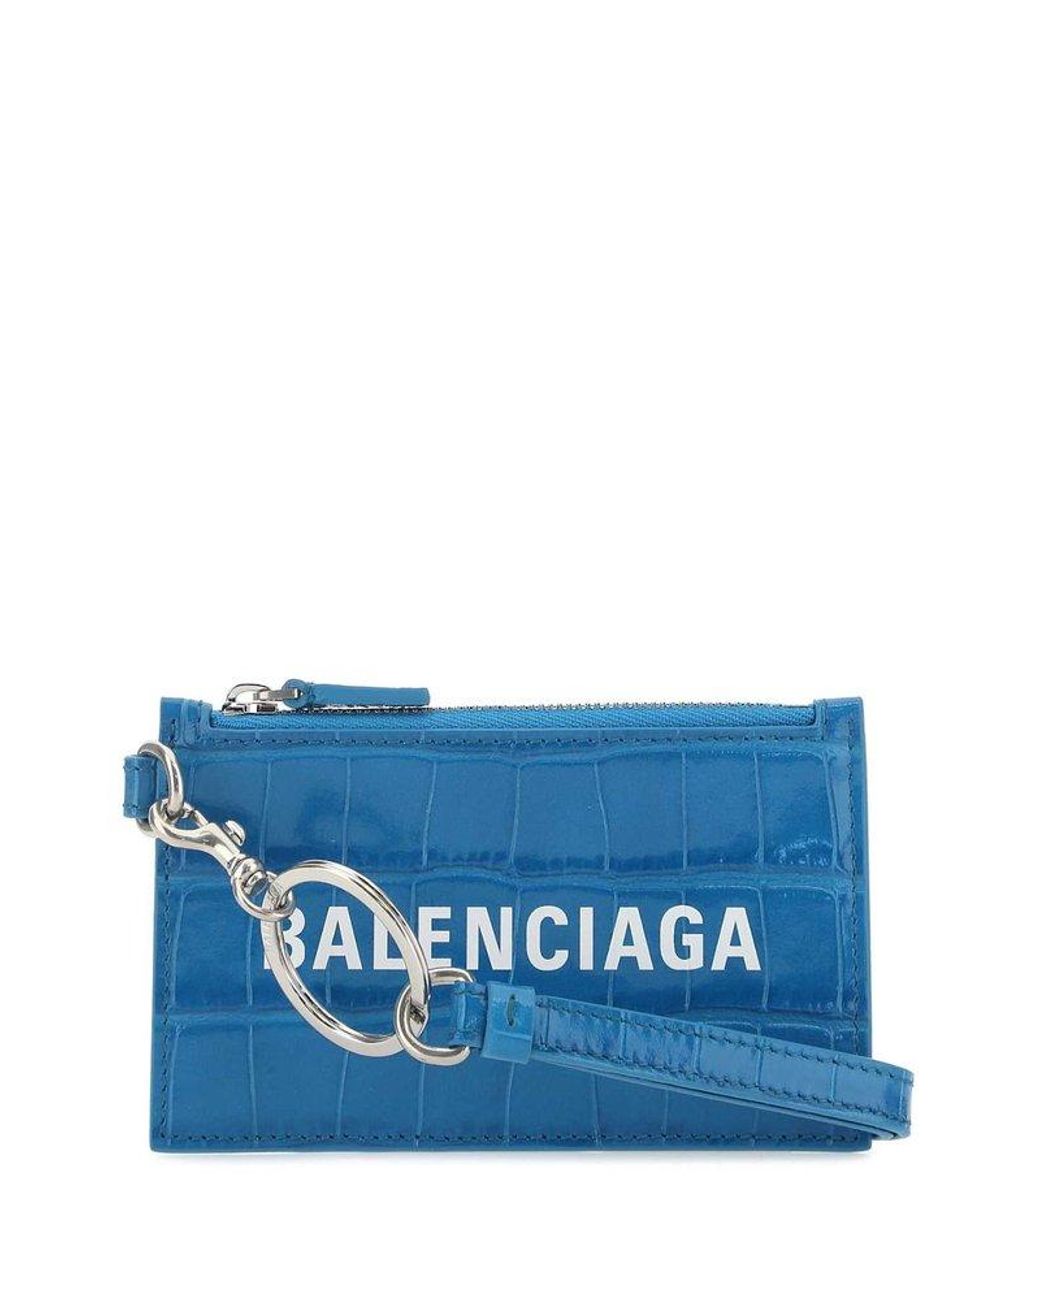 Balenciaga Turquoise Leather Card Holder in Blue | Lyst